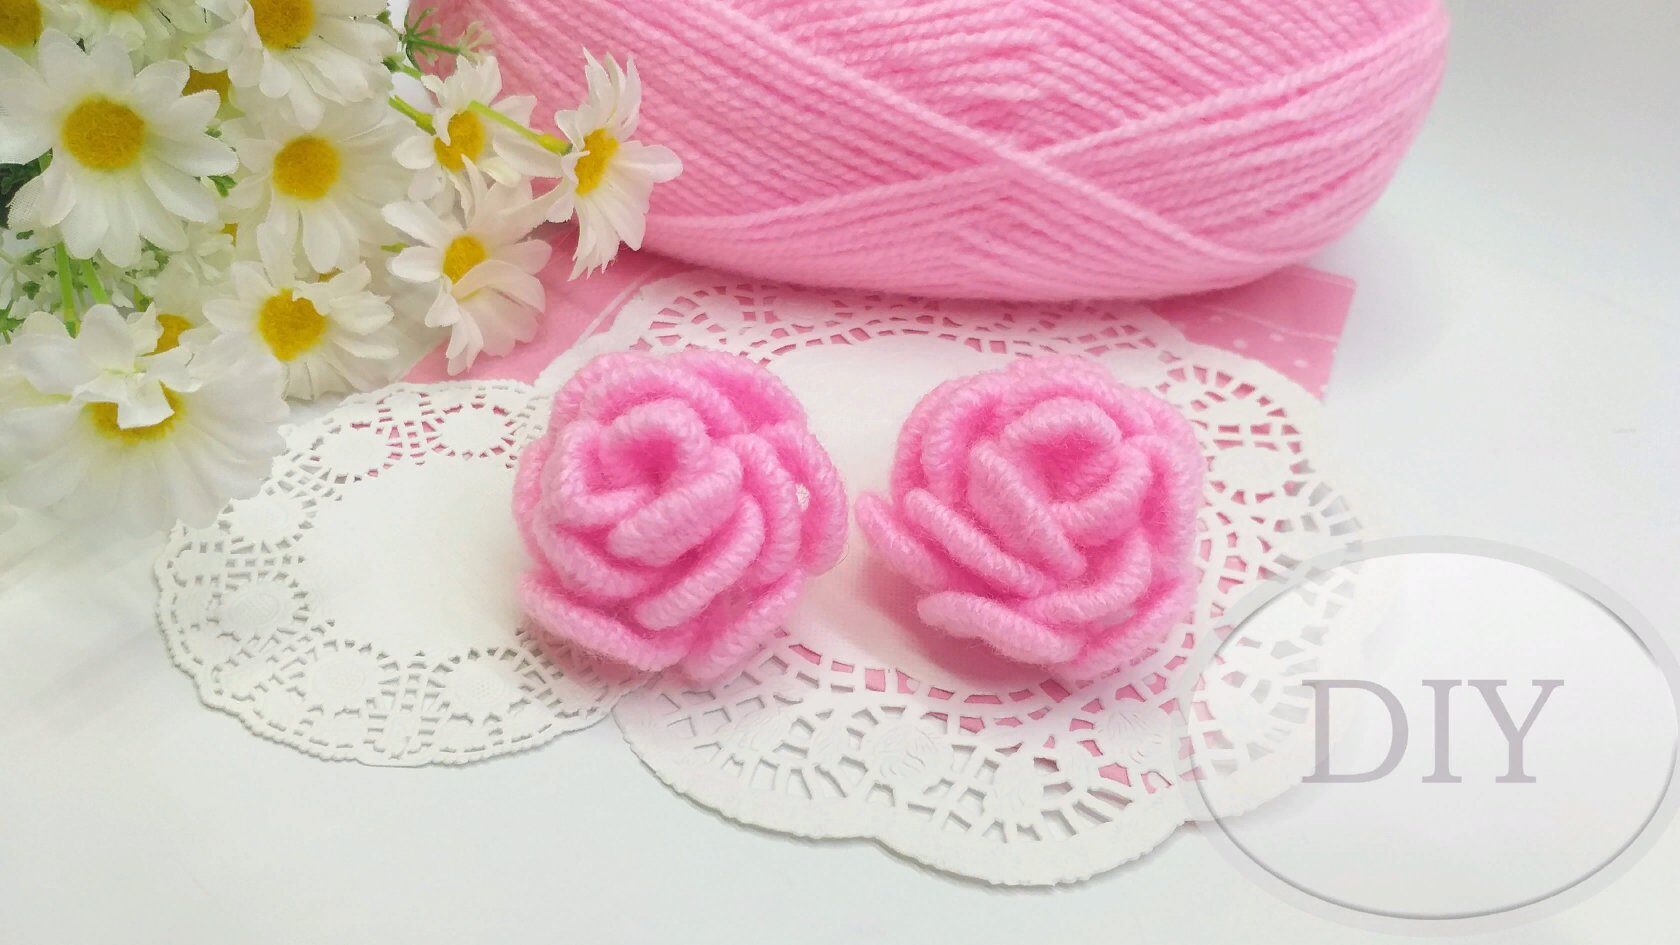 Розы БЕЗ спиц и крючка ? making Beautiful roses with your own hands is a very easy way